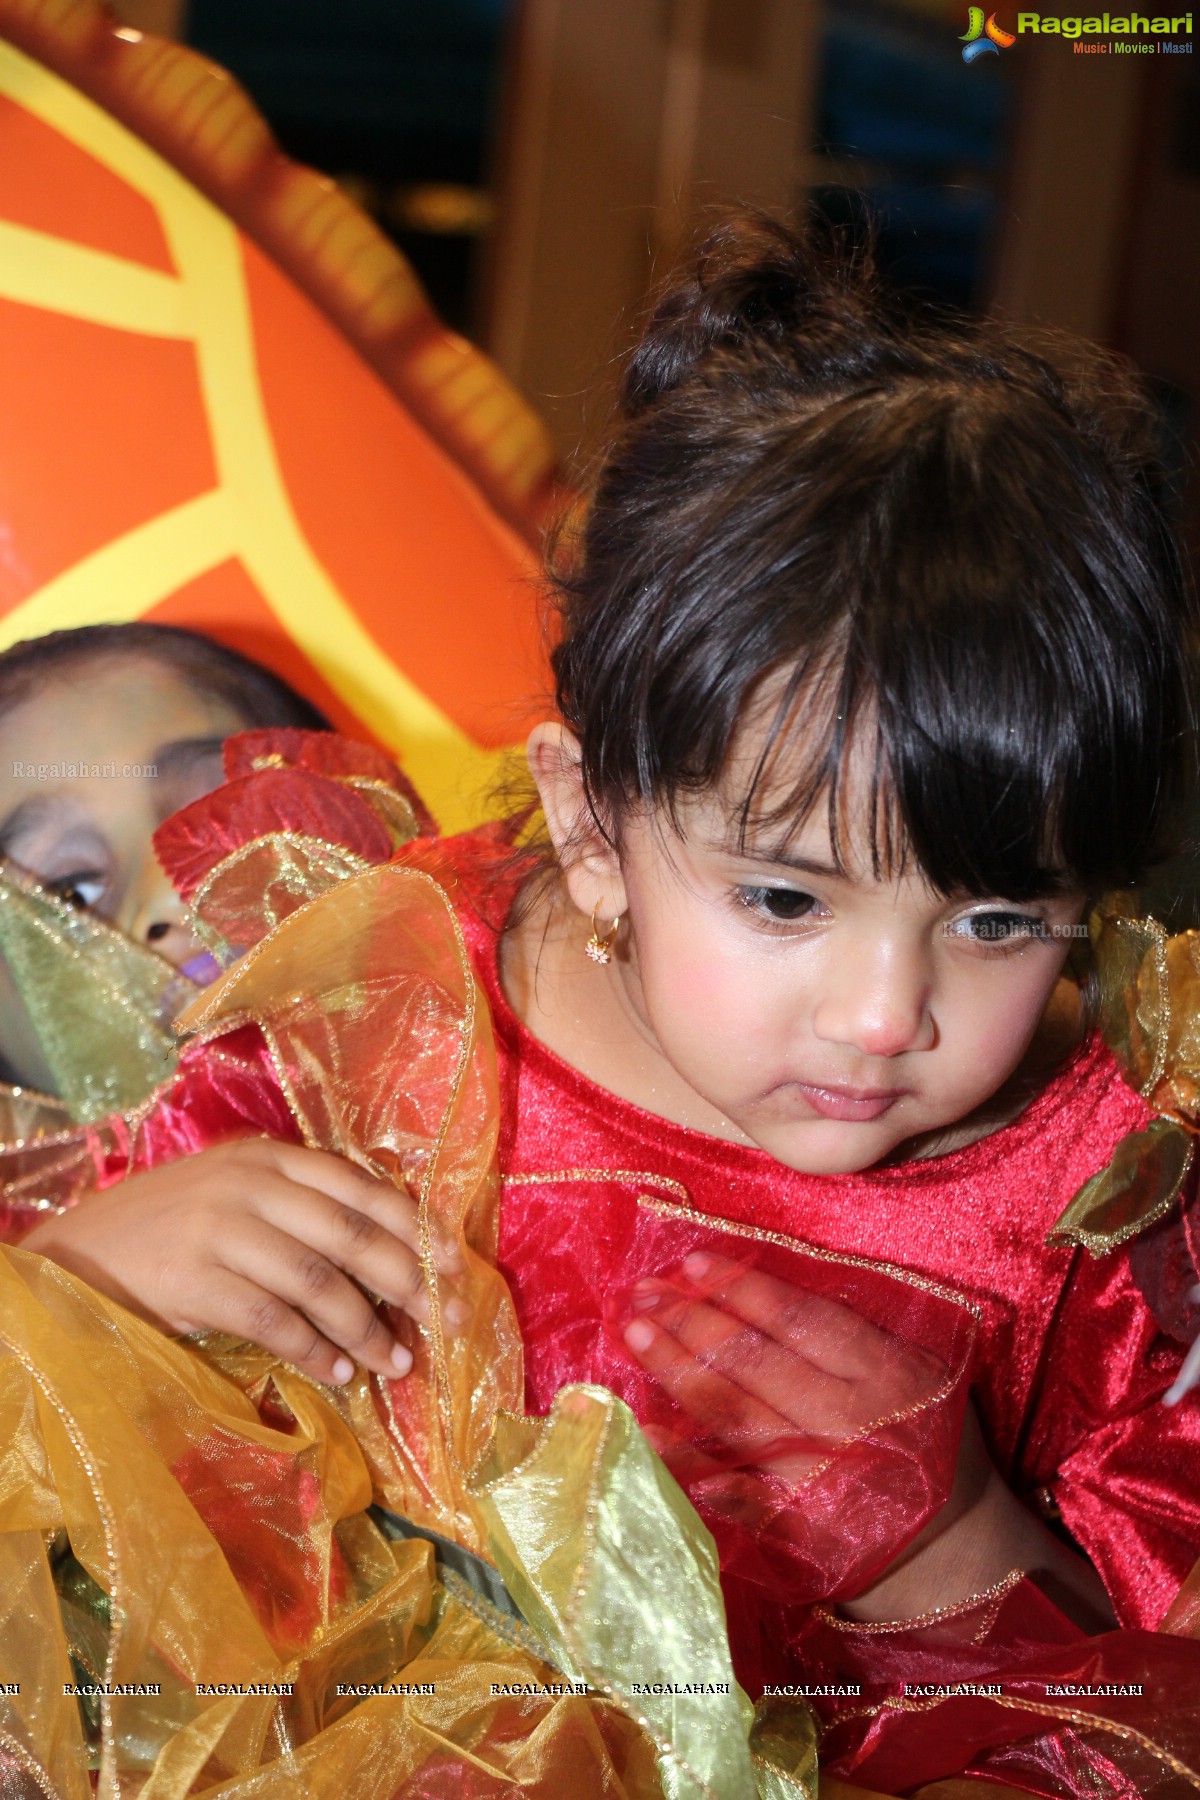 Halloween Celebrations 2016 at The Kids Center